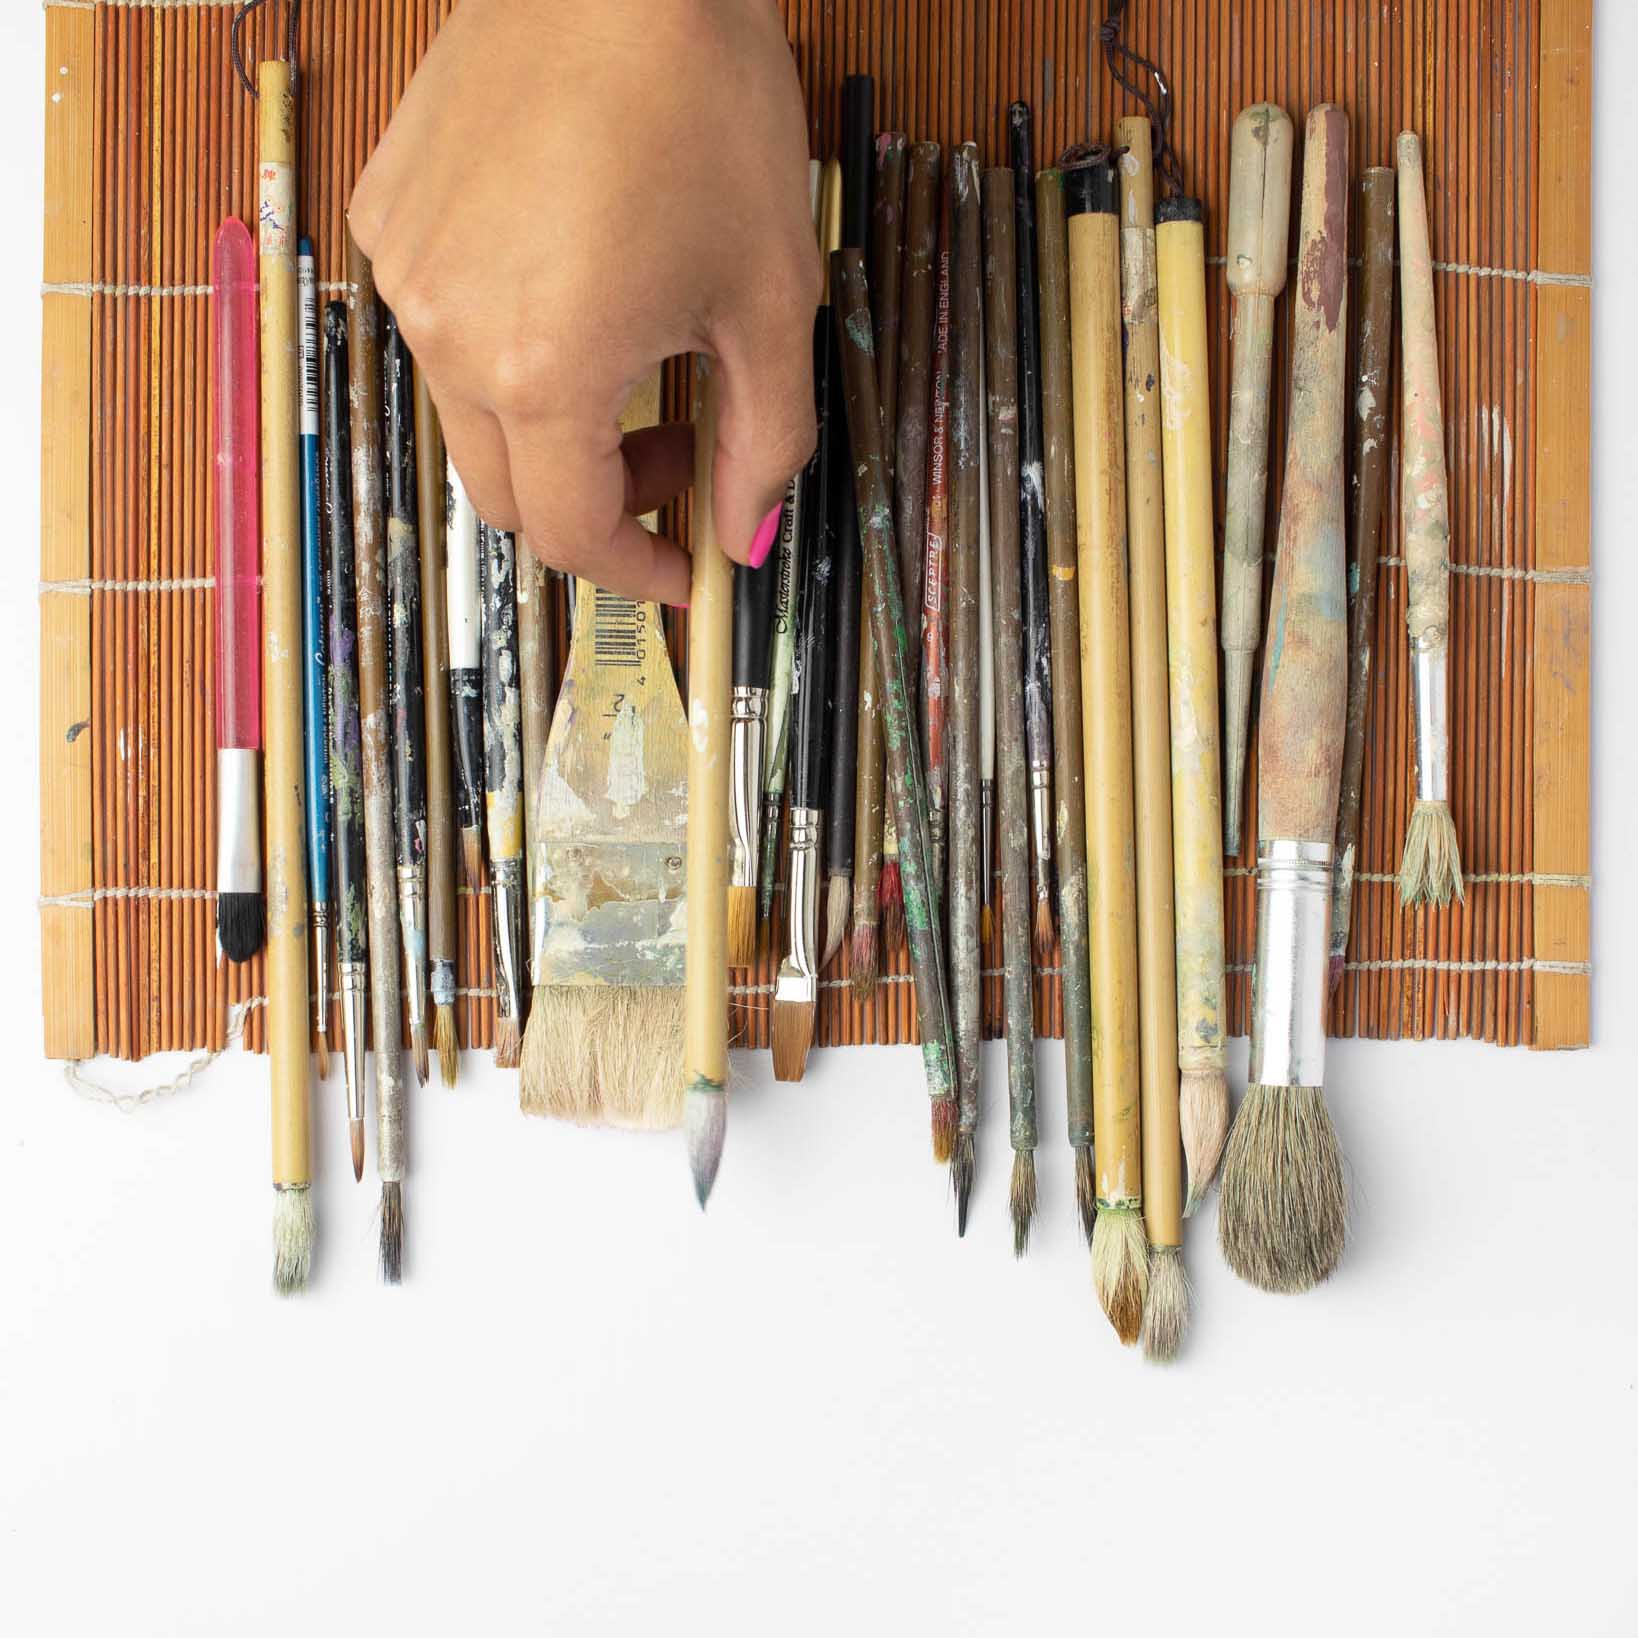 Chinese paintbrushes in a rollable chinoiserie paintbrush holder